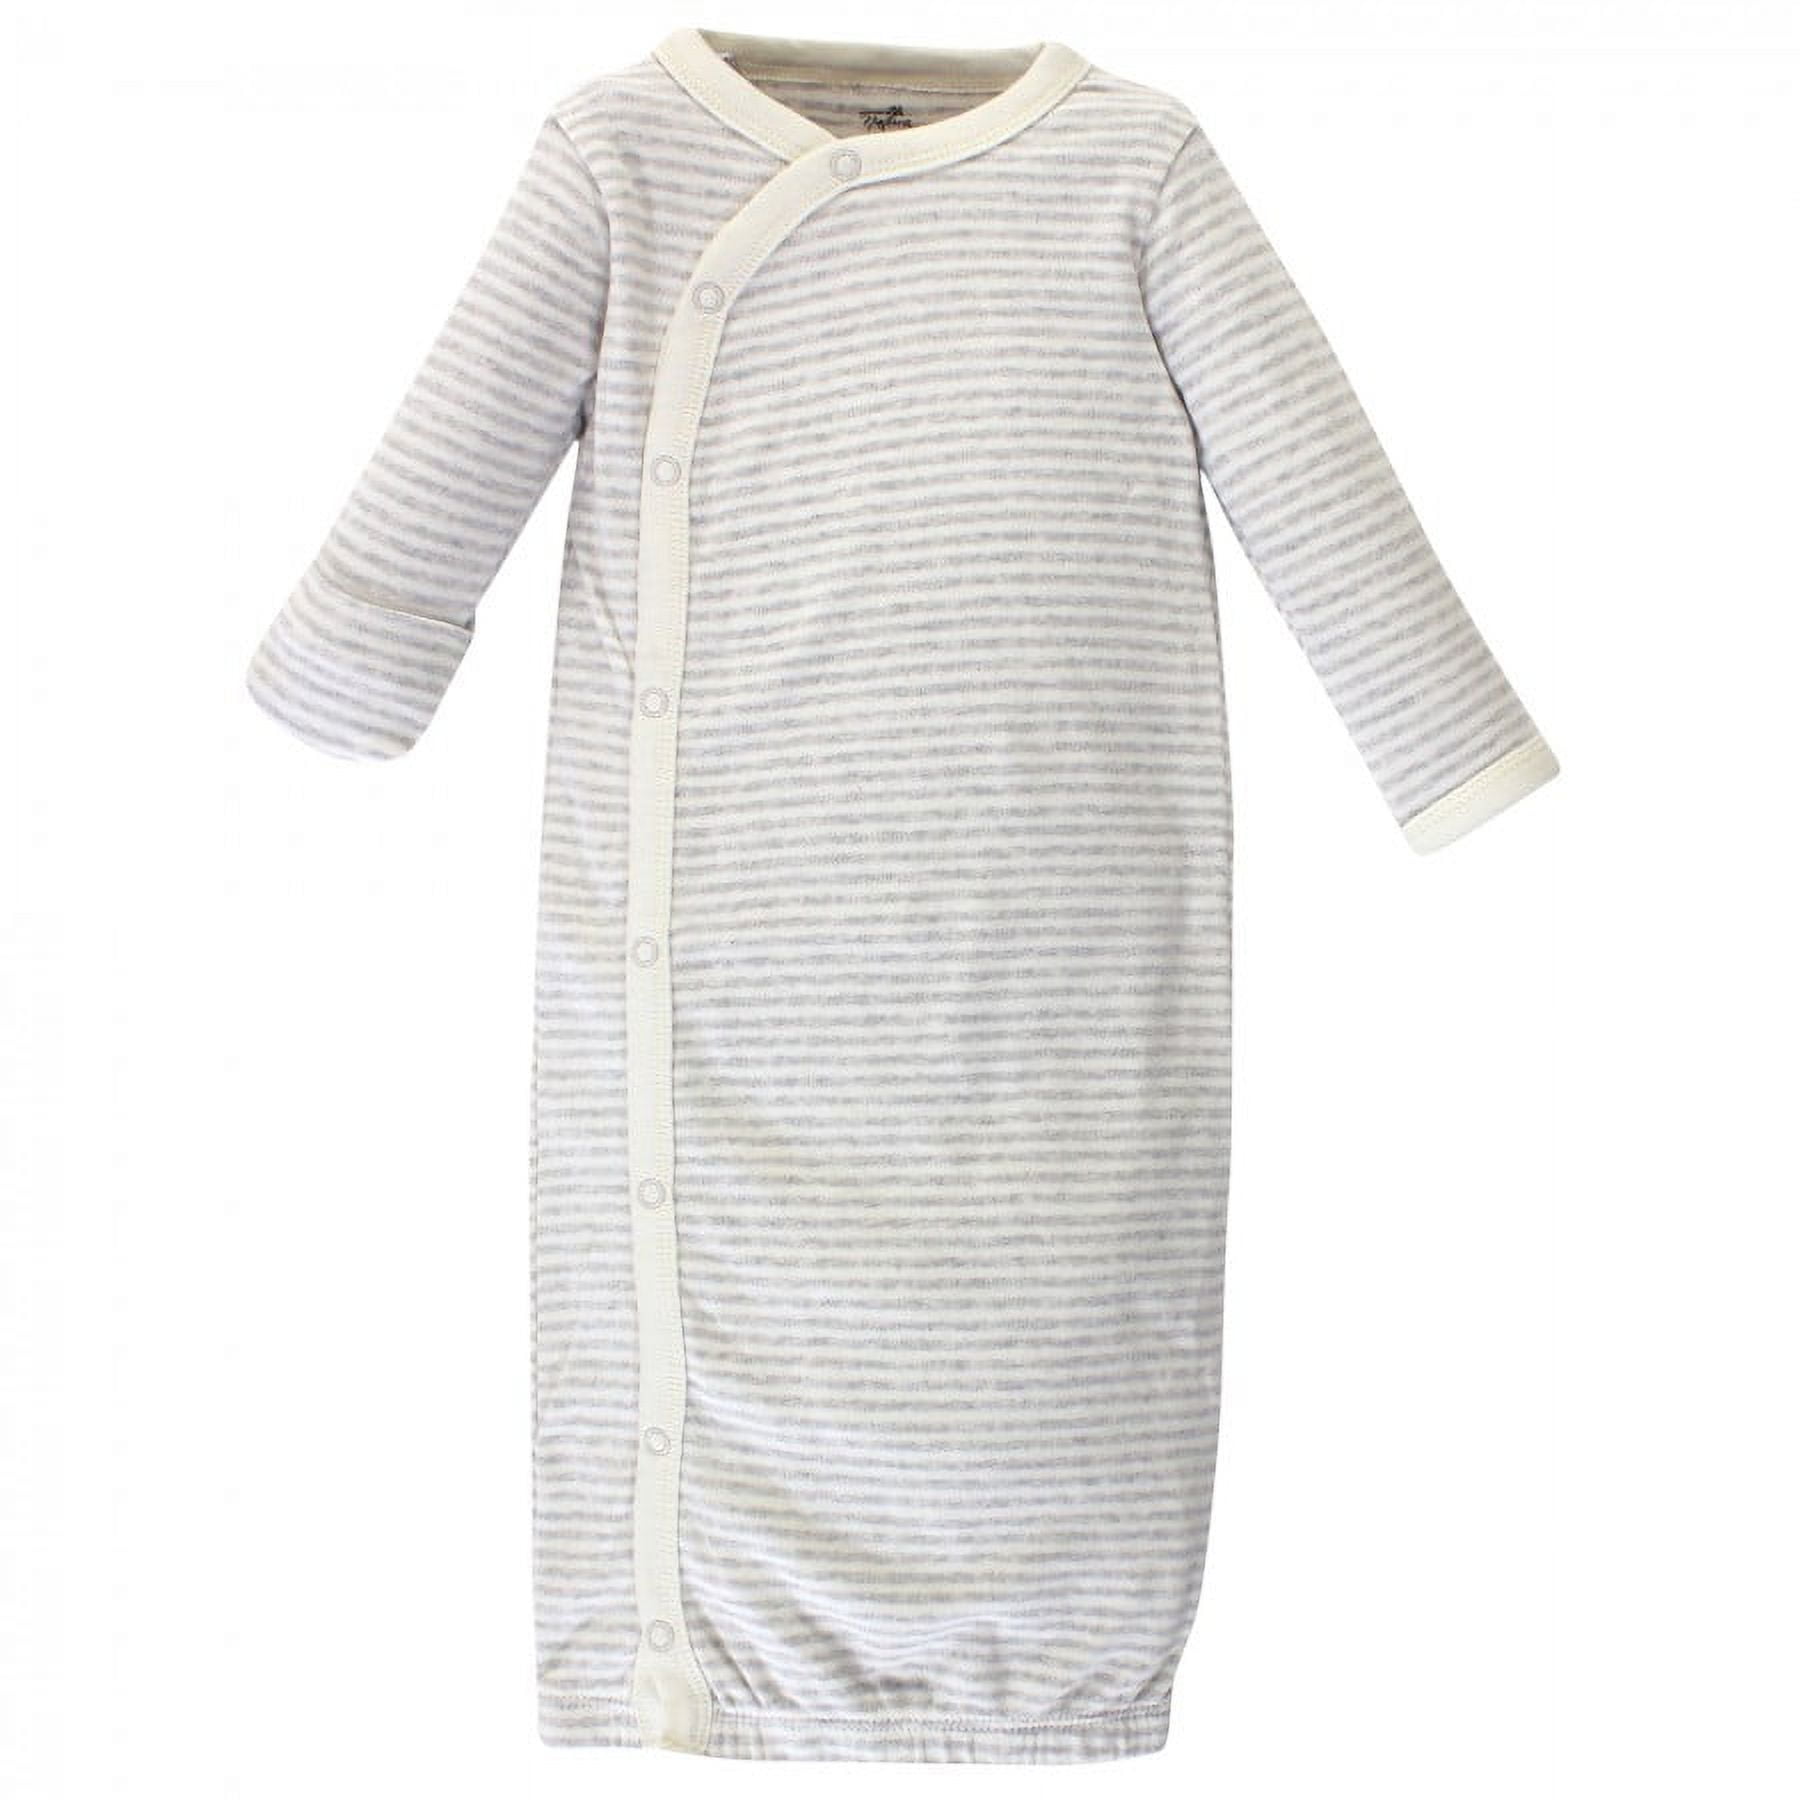 Touched by Nature Baby Organic Cotton Side-Closure Snap Long-Sleeve Gowns  3pk, Hedgehog, Preemie 